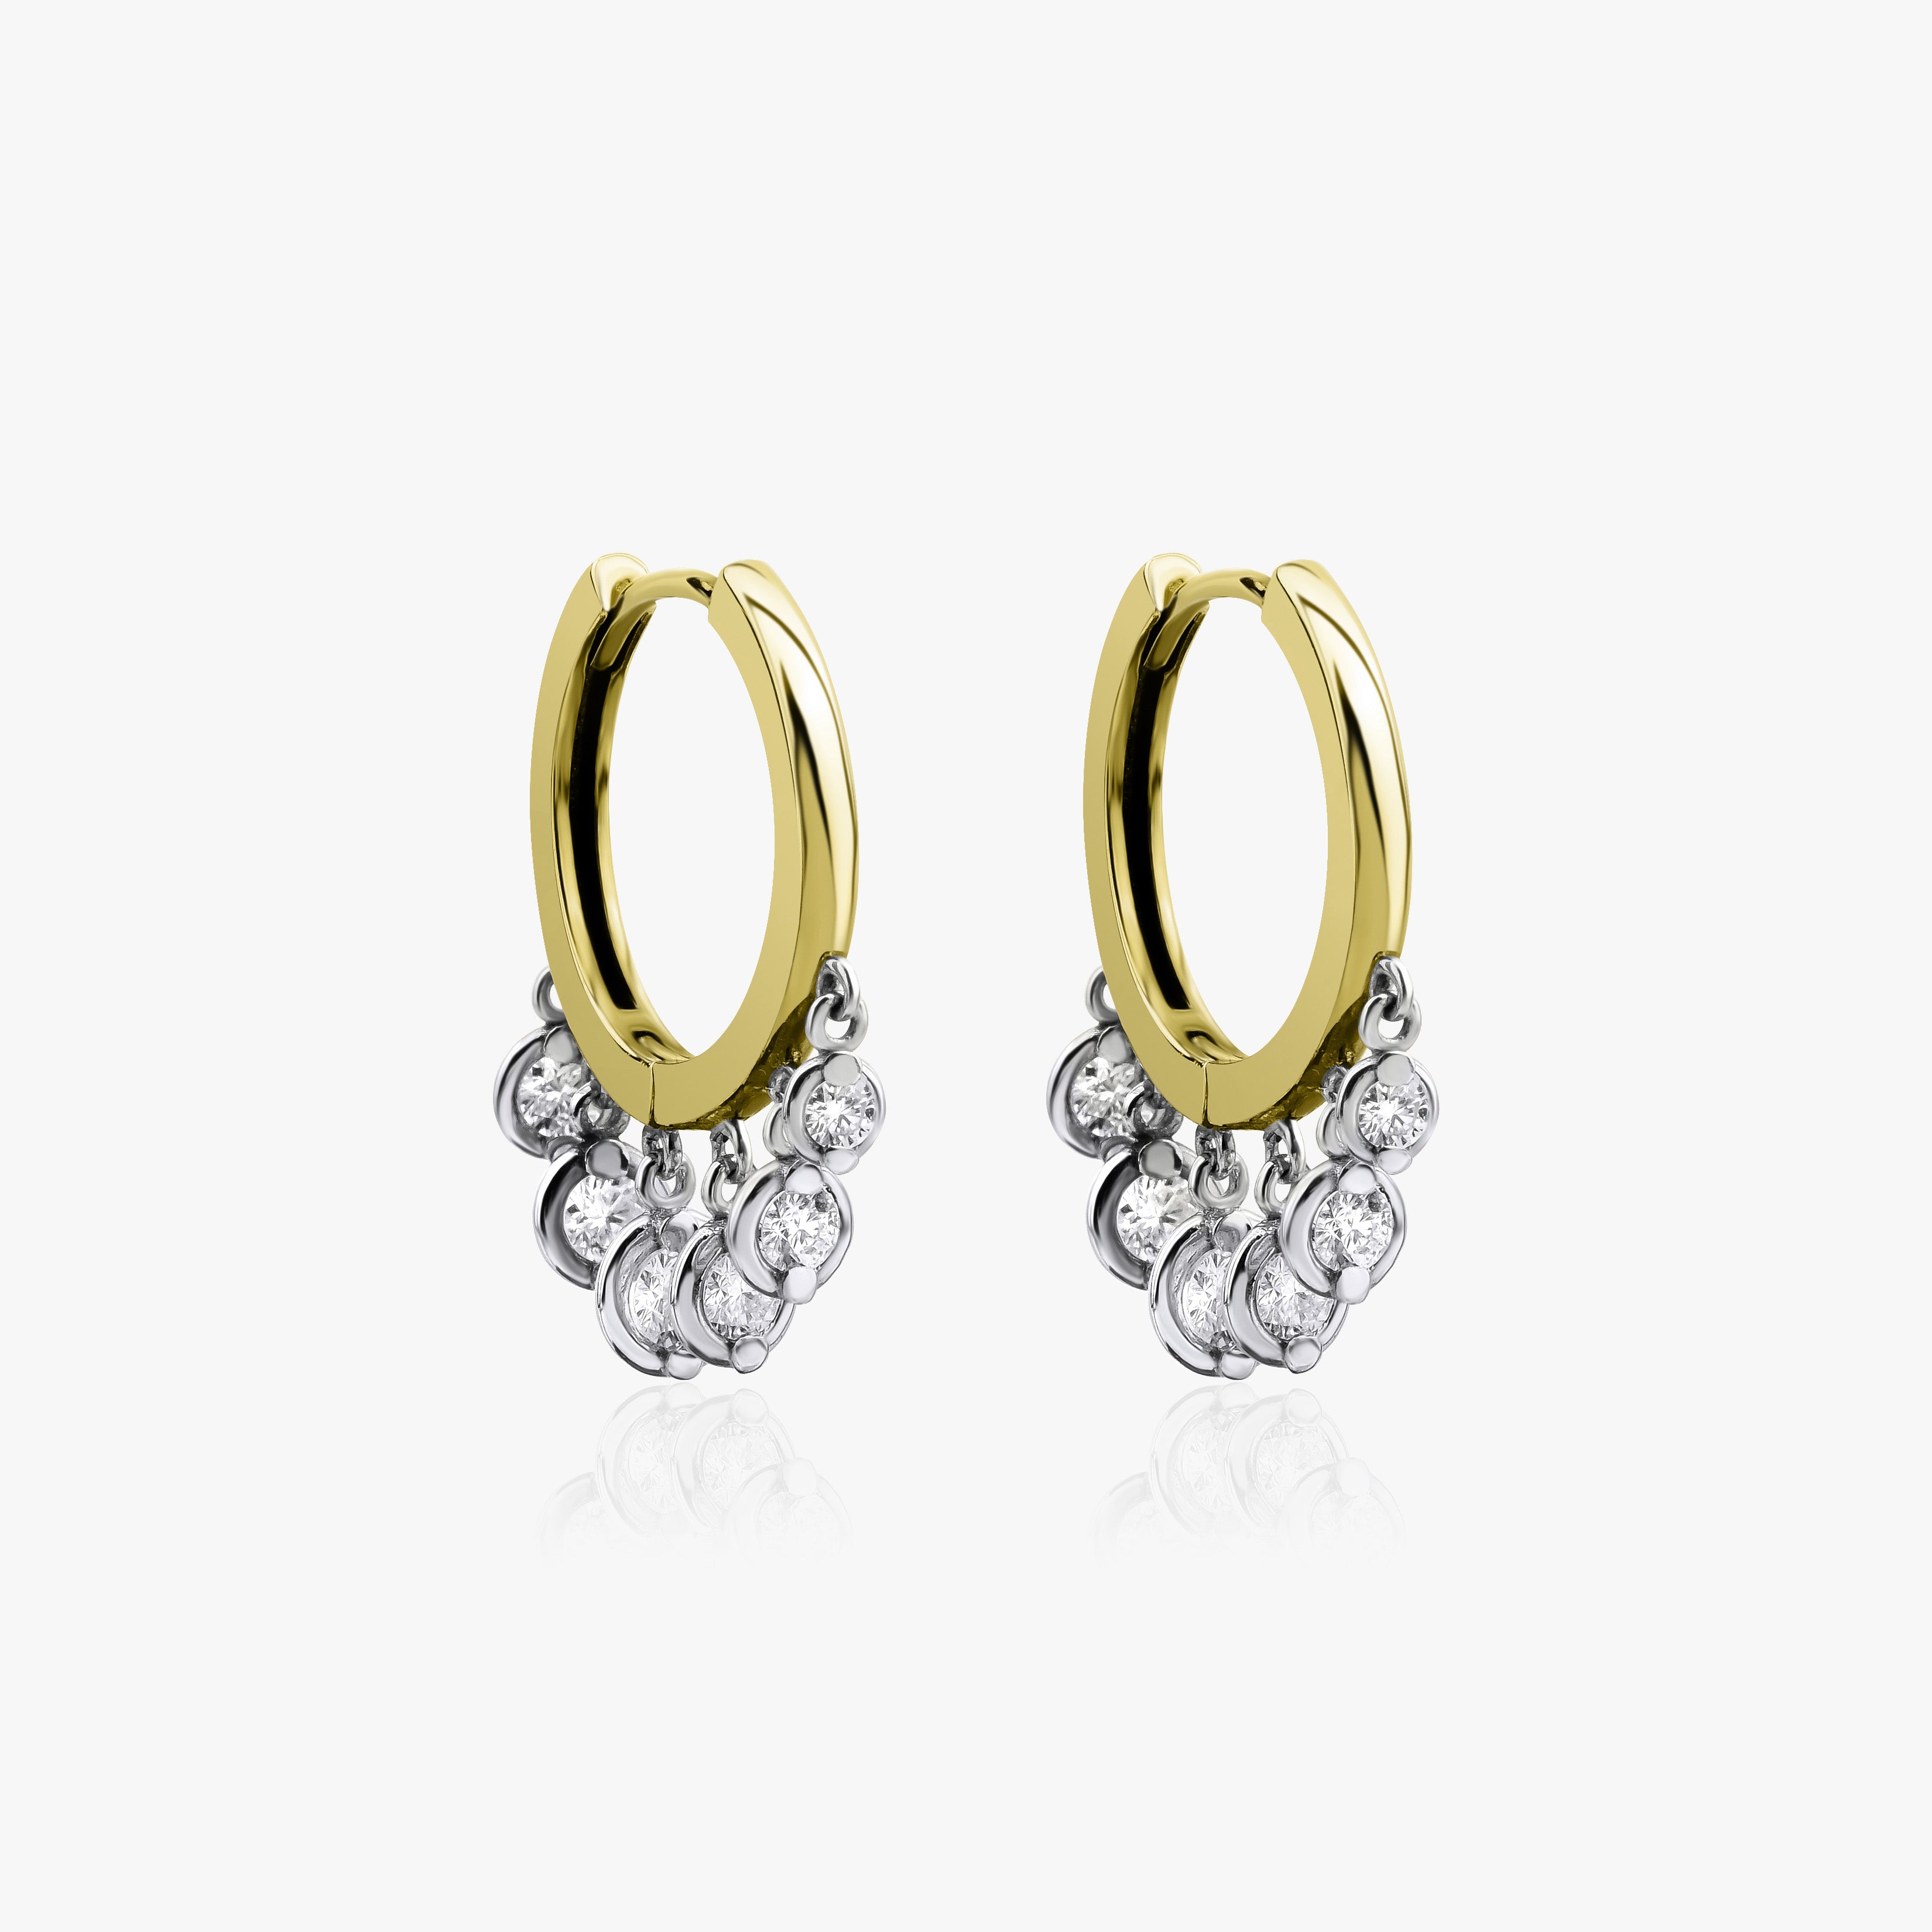 Diamond Hoop Earrings With Bezel Set Diamond Charms Available in 14K and 18K Gold